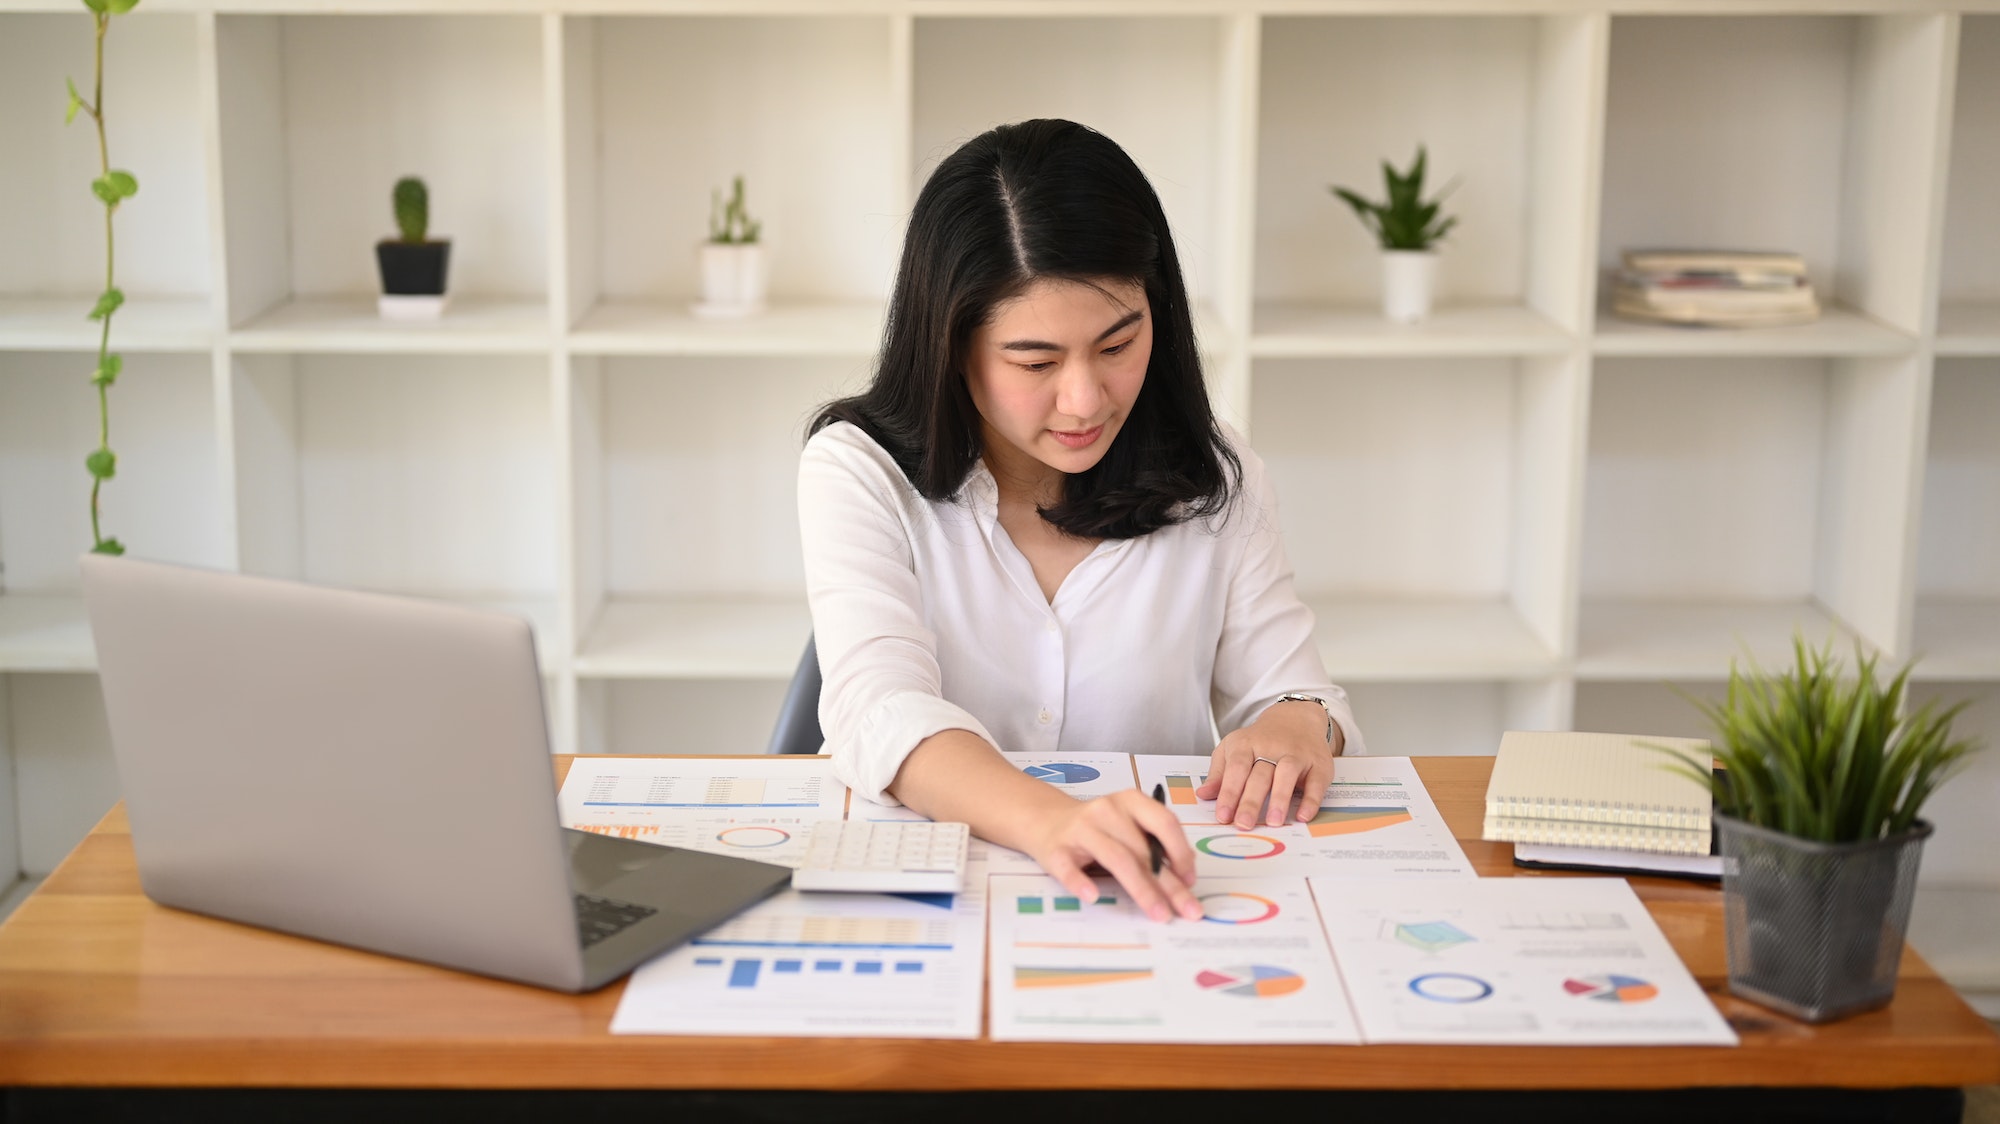 Concentrated asian woman accountant using laptop and analyzing financial graph on wooden table.